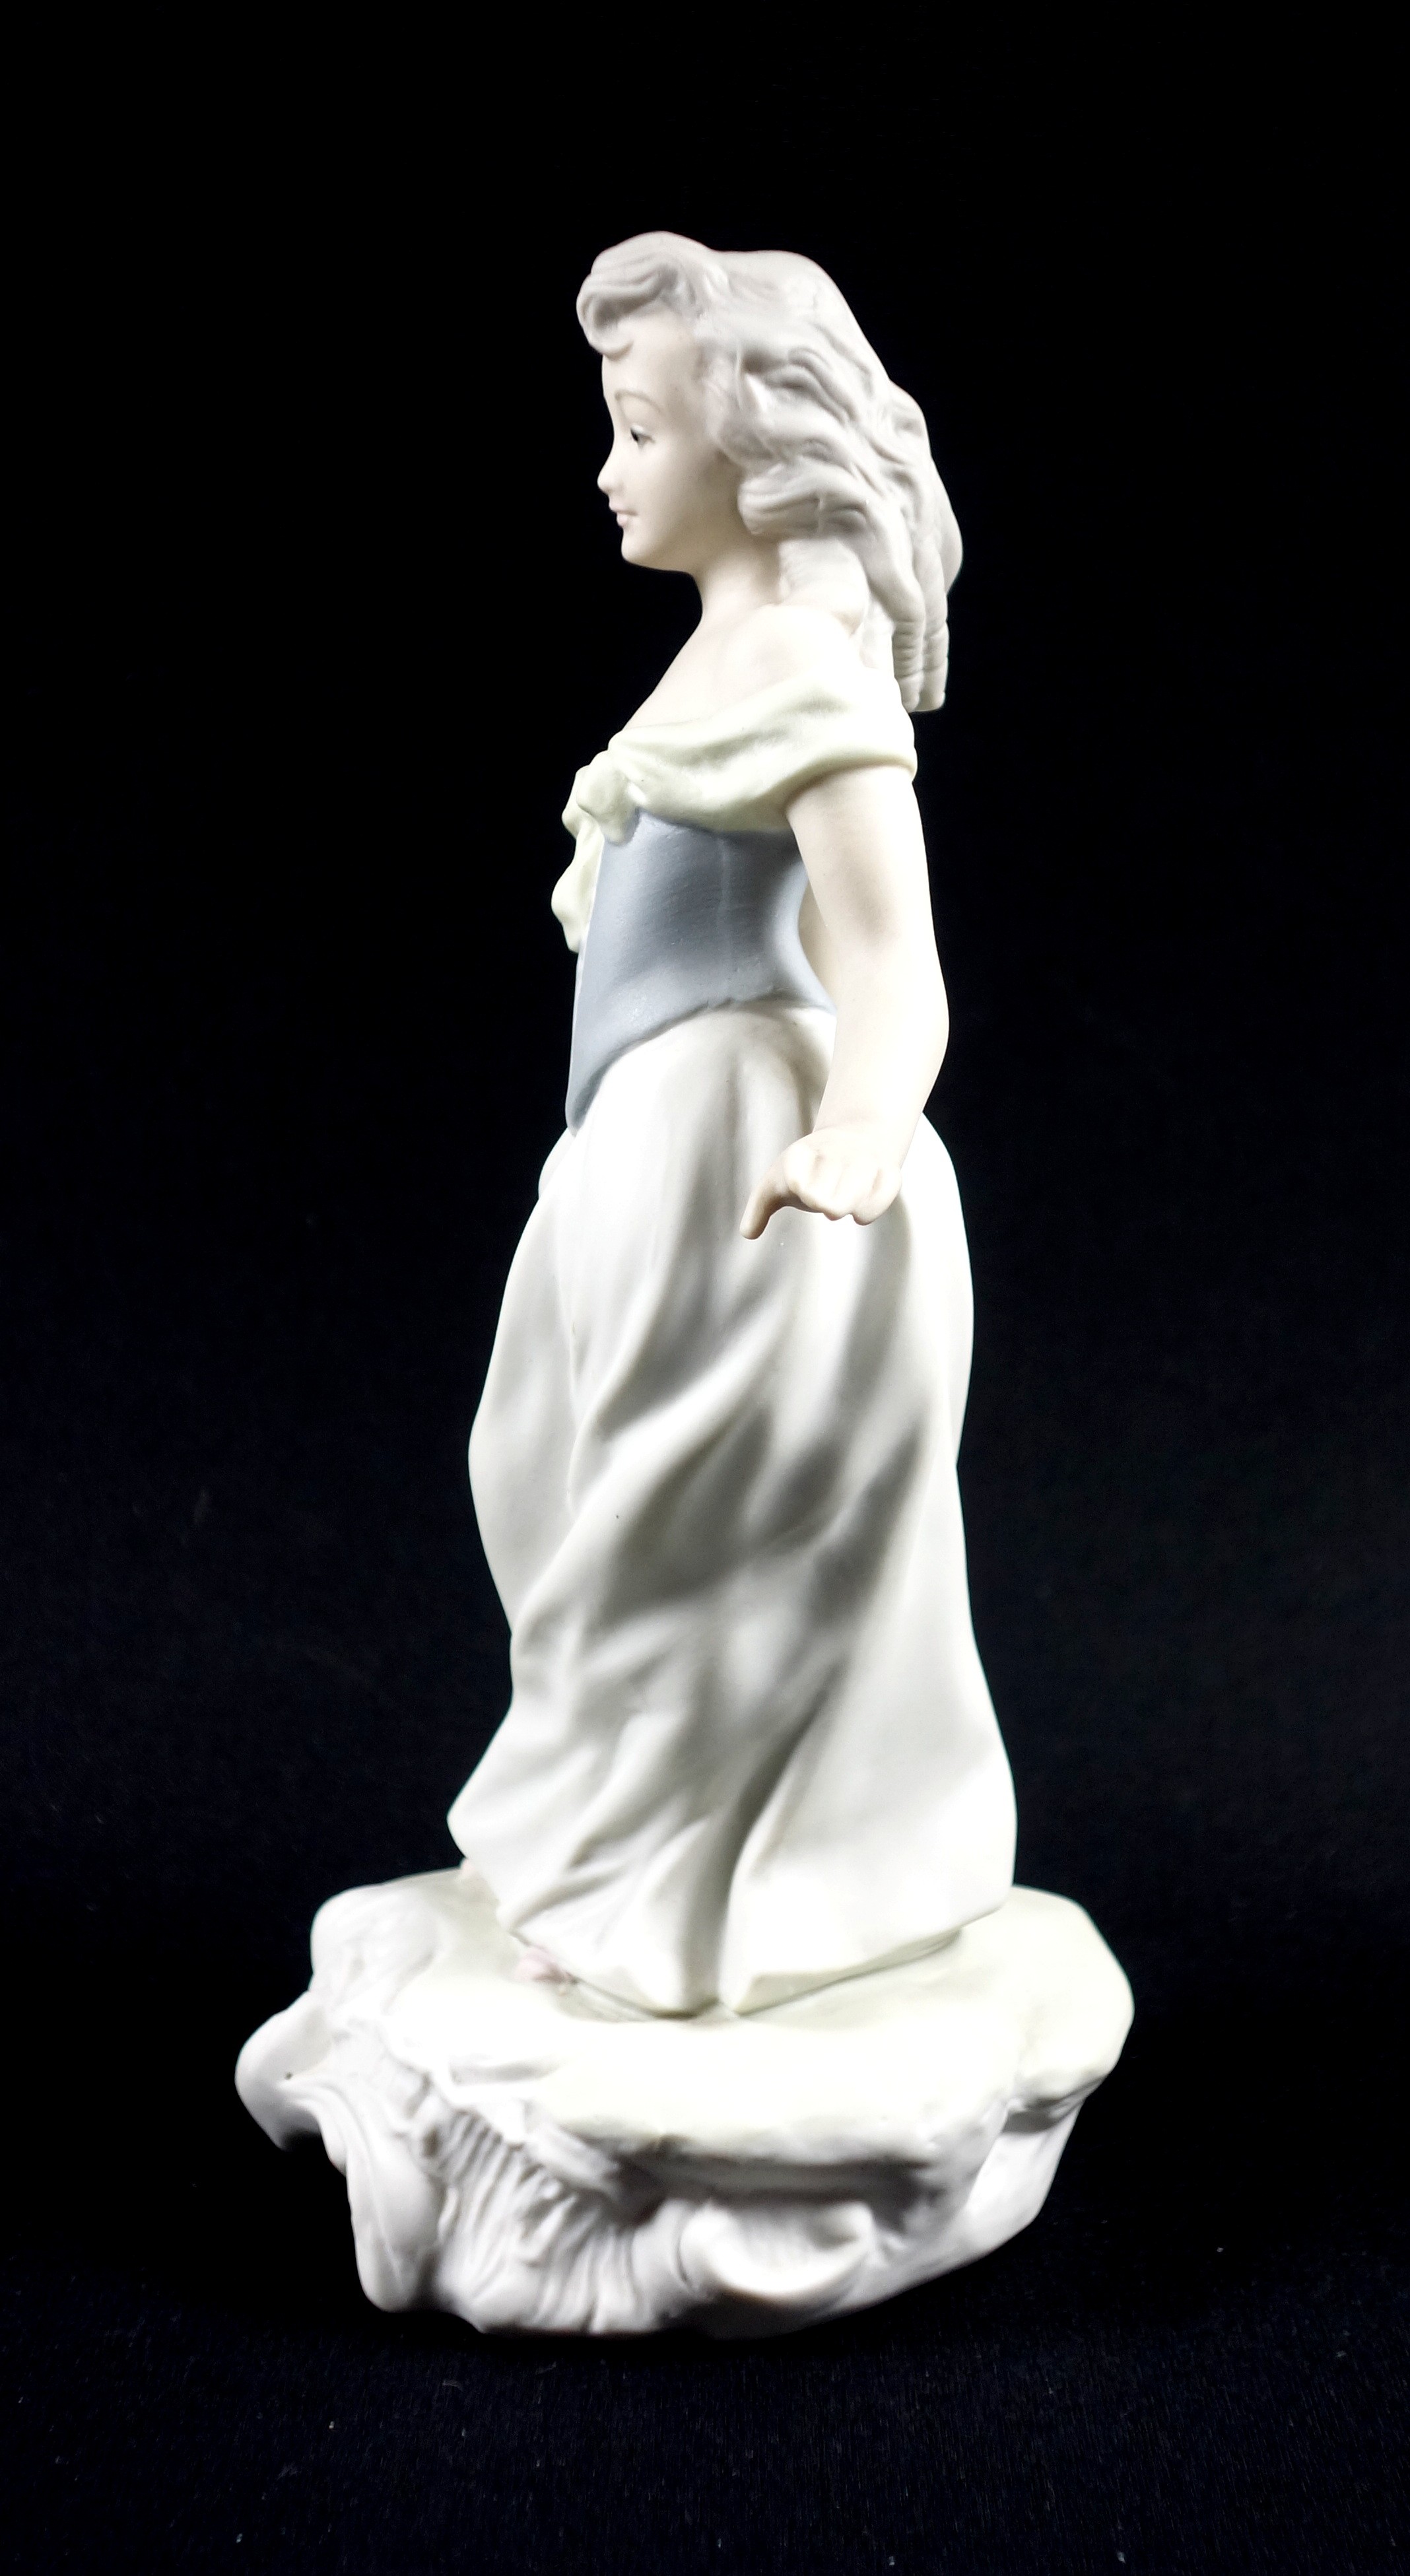 Lladro prototype bisque porcelain figure of a young woman, "The Prom", wearing a blue laced corset - Image 2 of 5